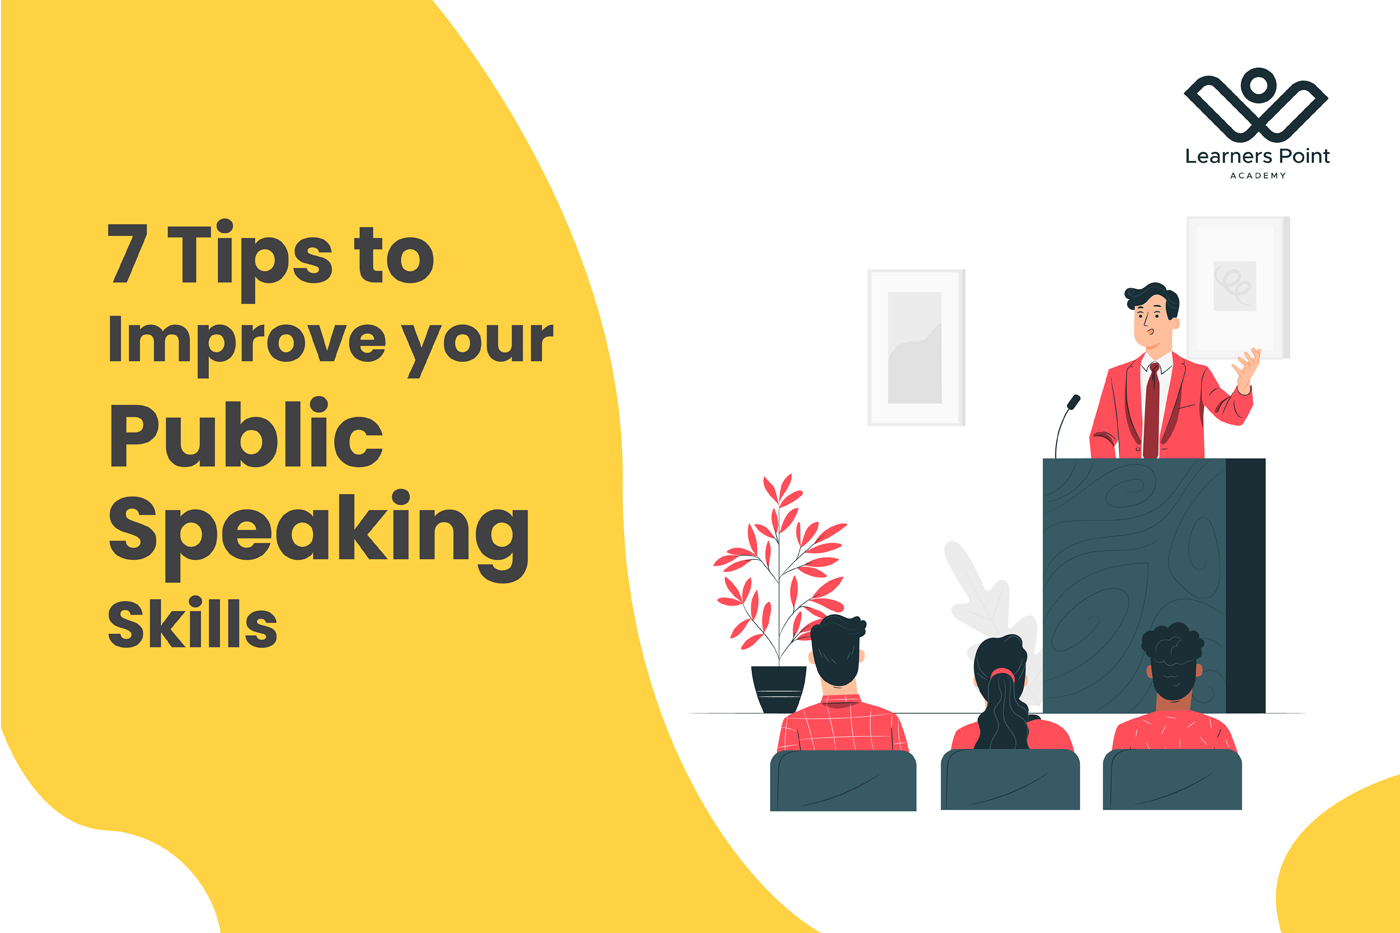 7 Expert Tips to Improve your Public Speaking Skills